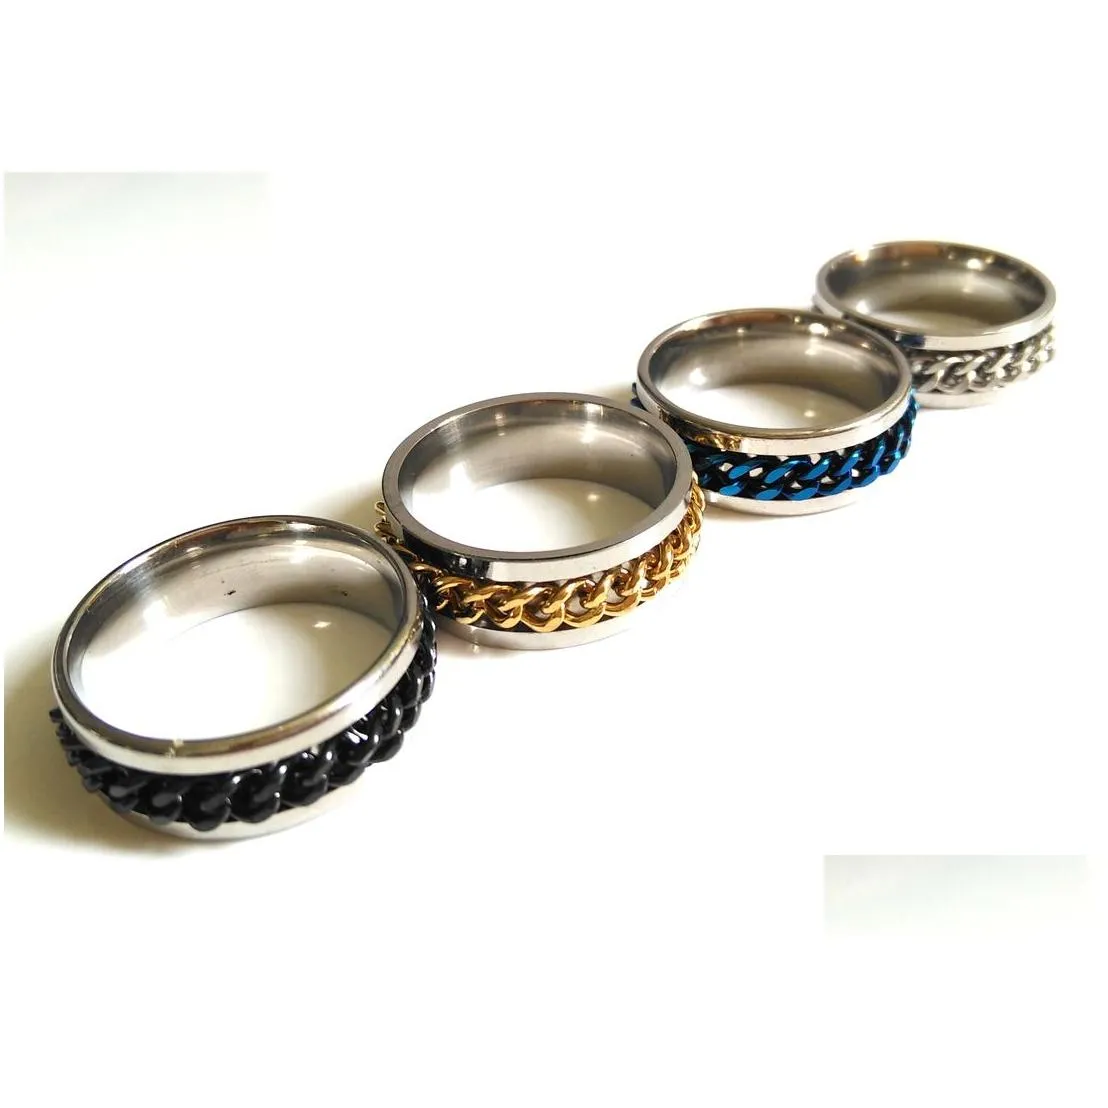 50pcs spin chain ring mens boys cool rock punk 316l stainless steel spinner ring man accessories birthday gift xmas gift 4 colors